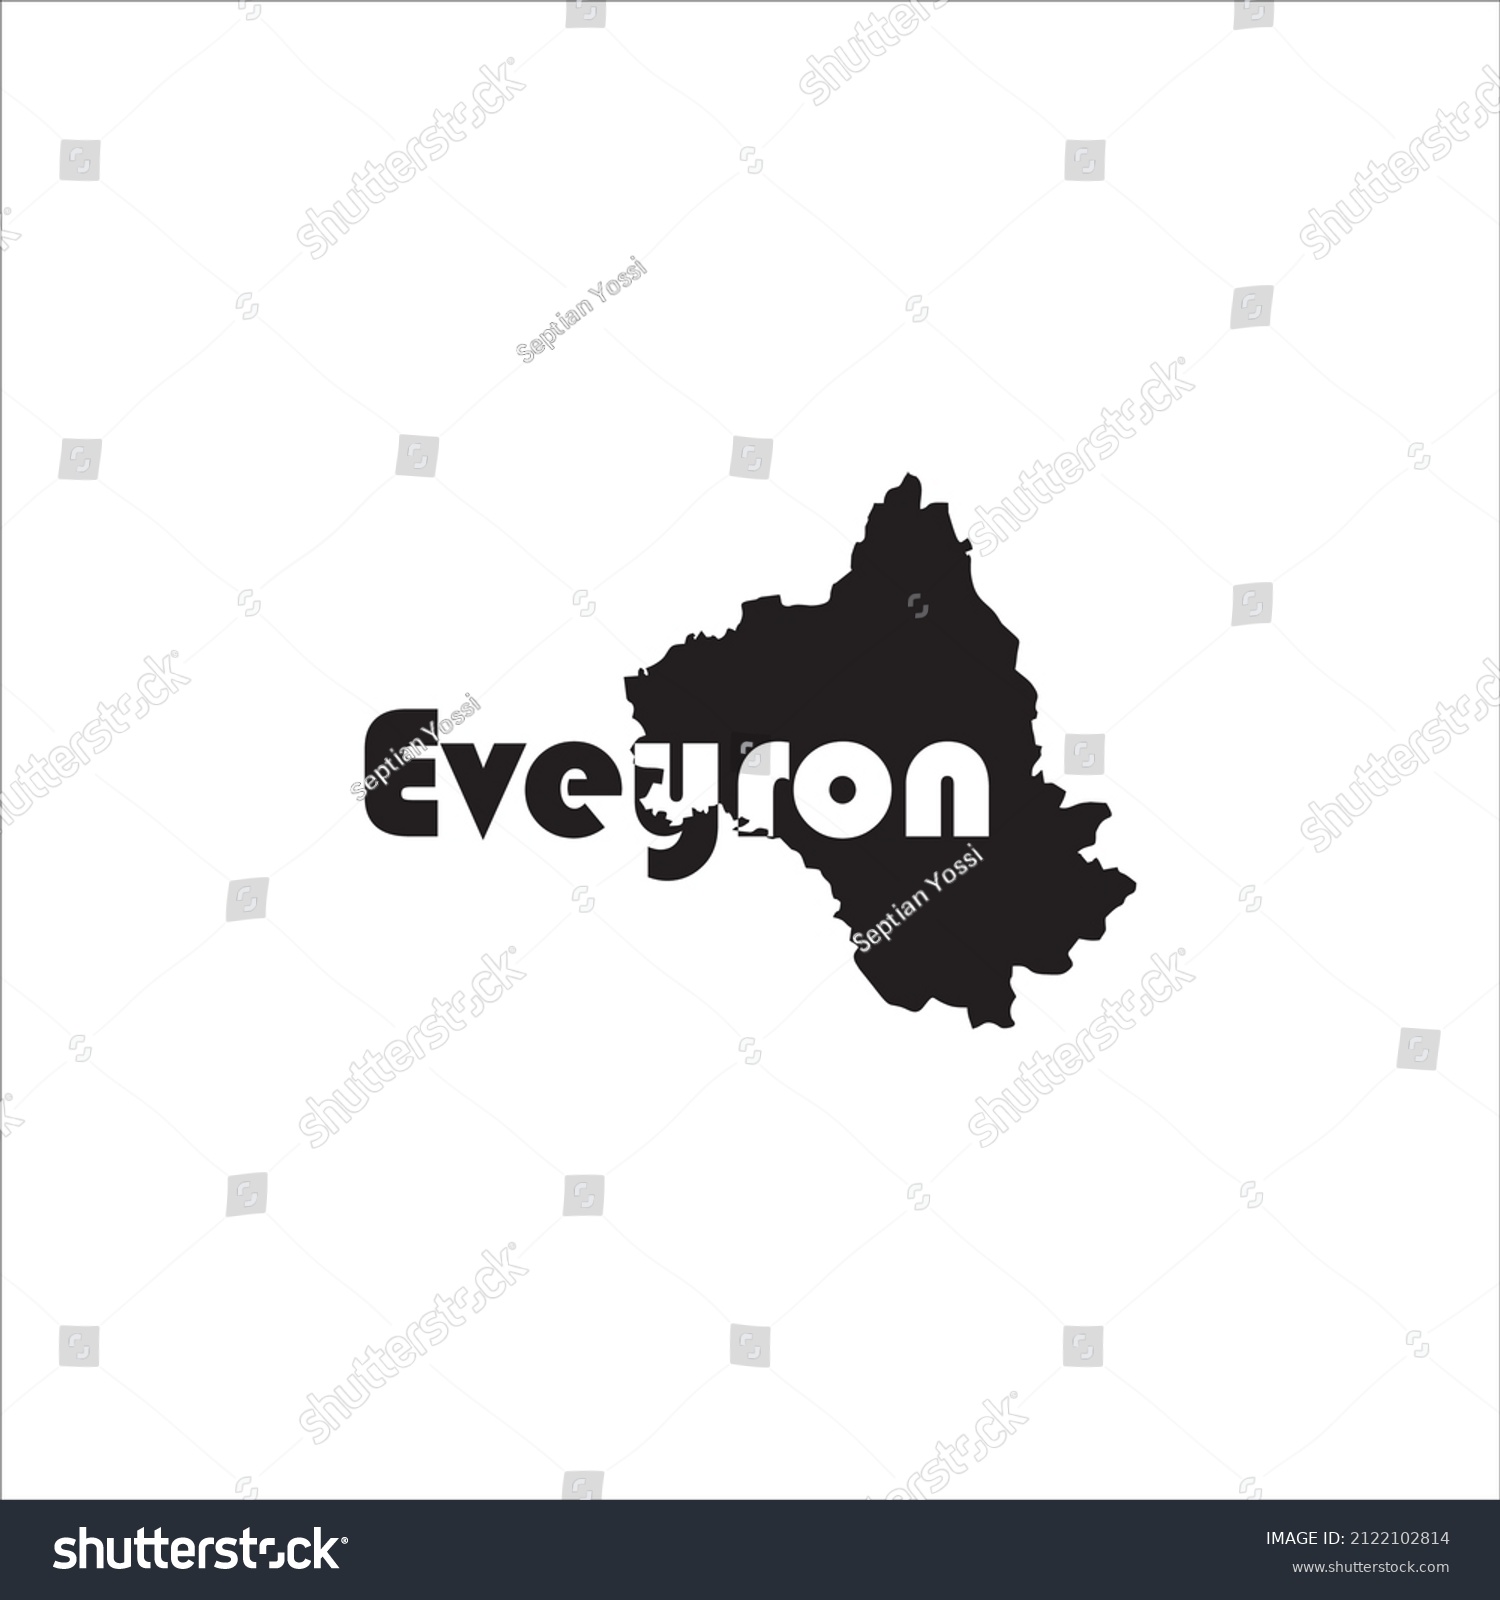 Eveyron Map Black Lettering Design On Stock Vector (Royalty Free ...